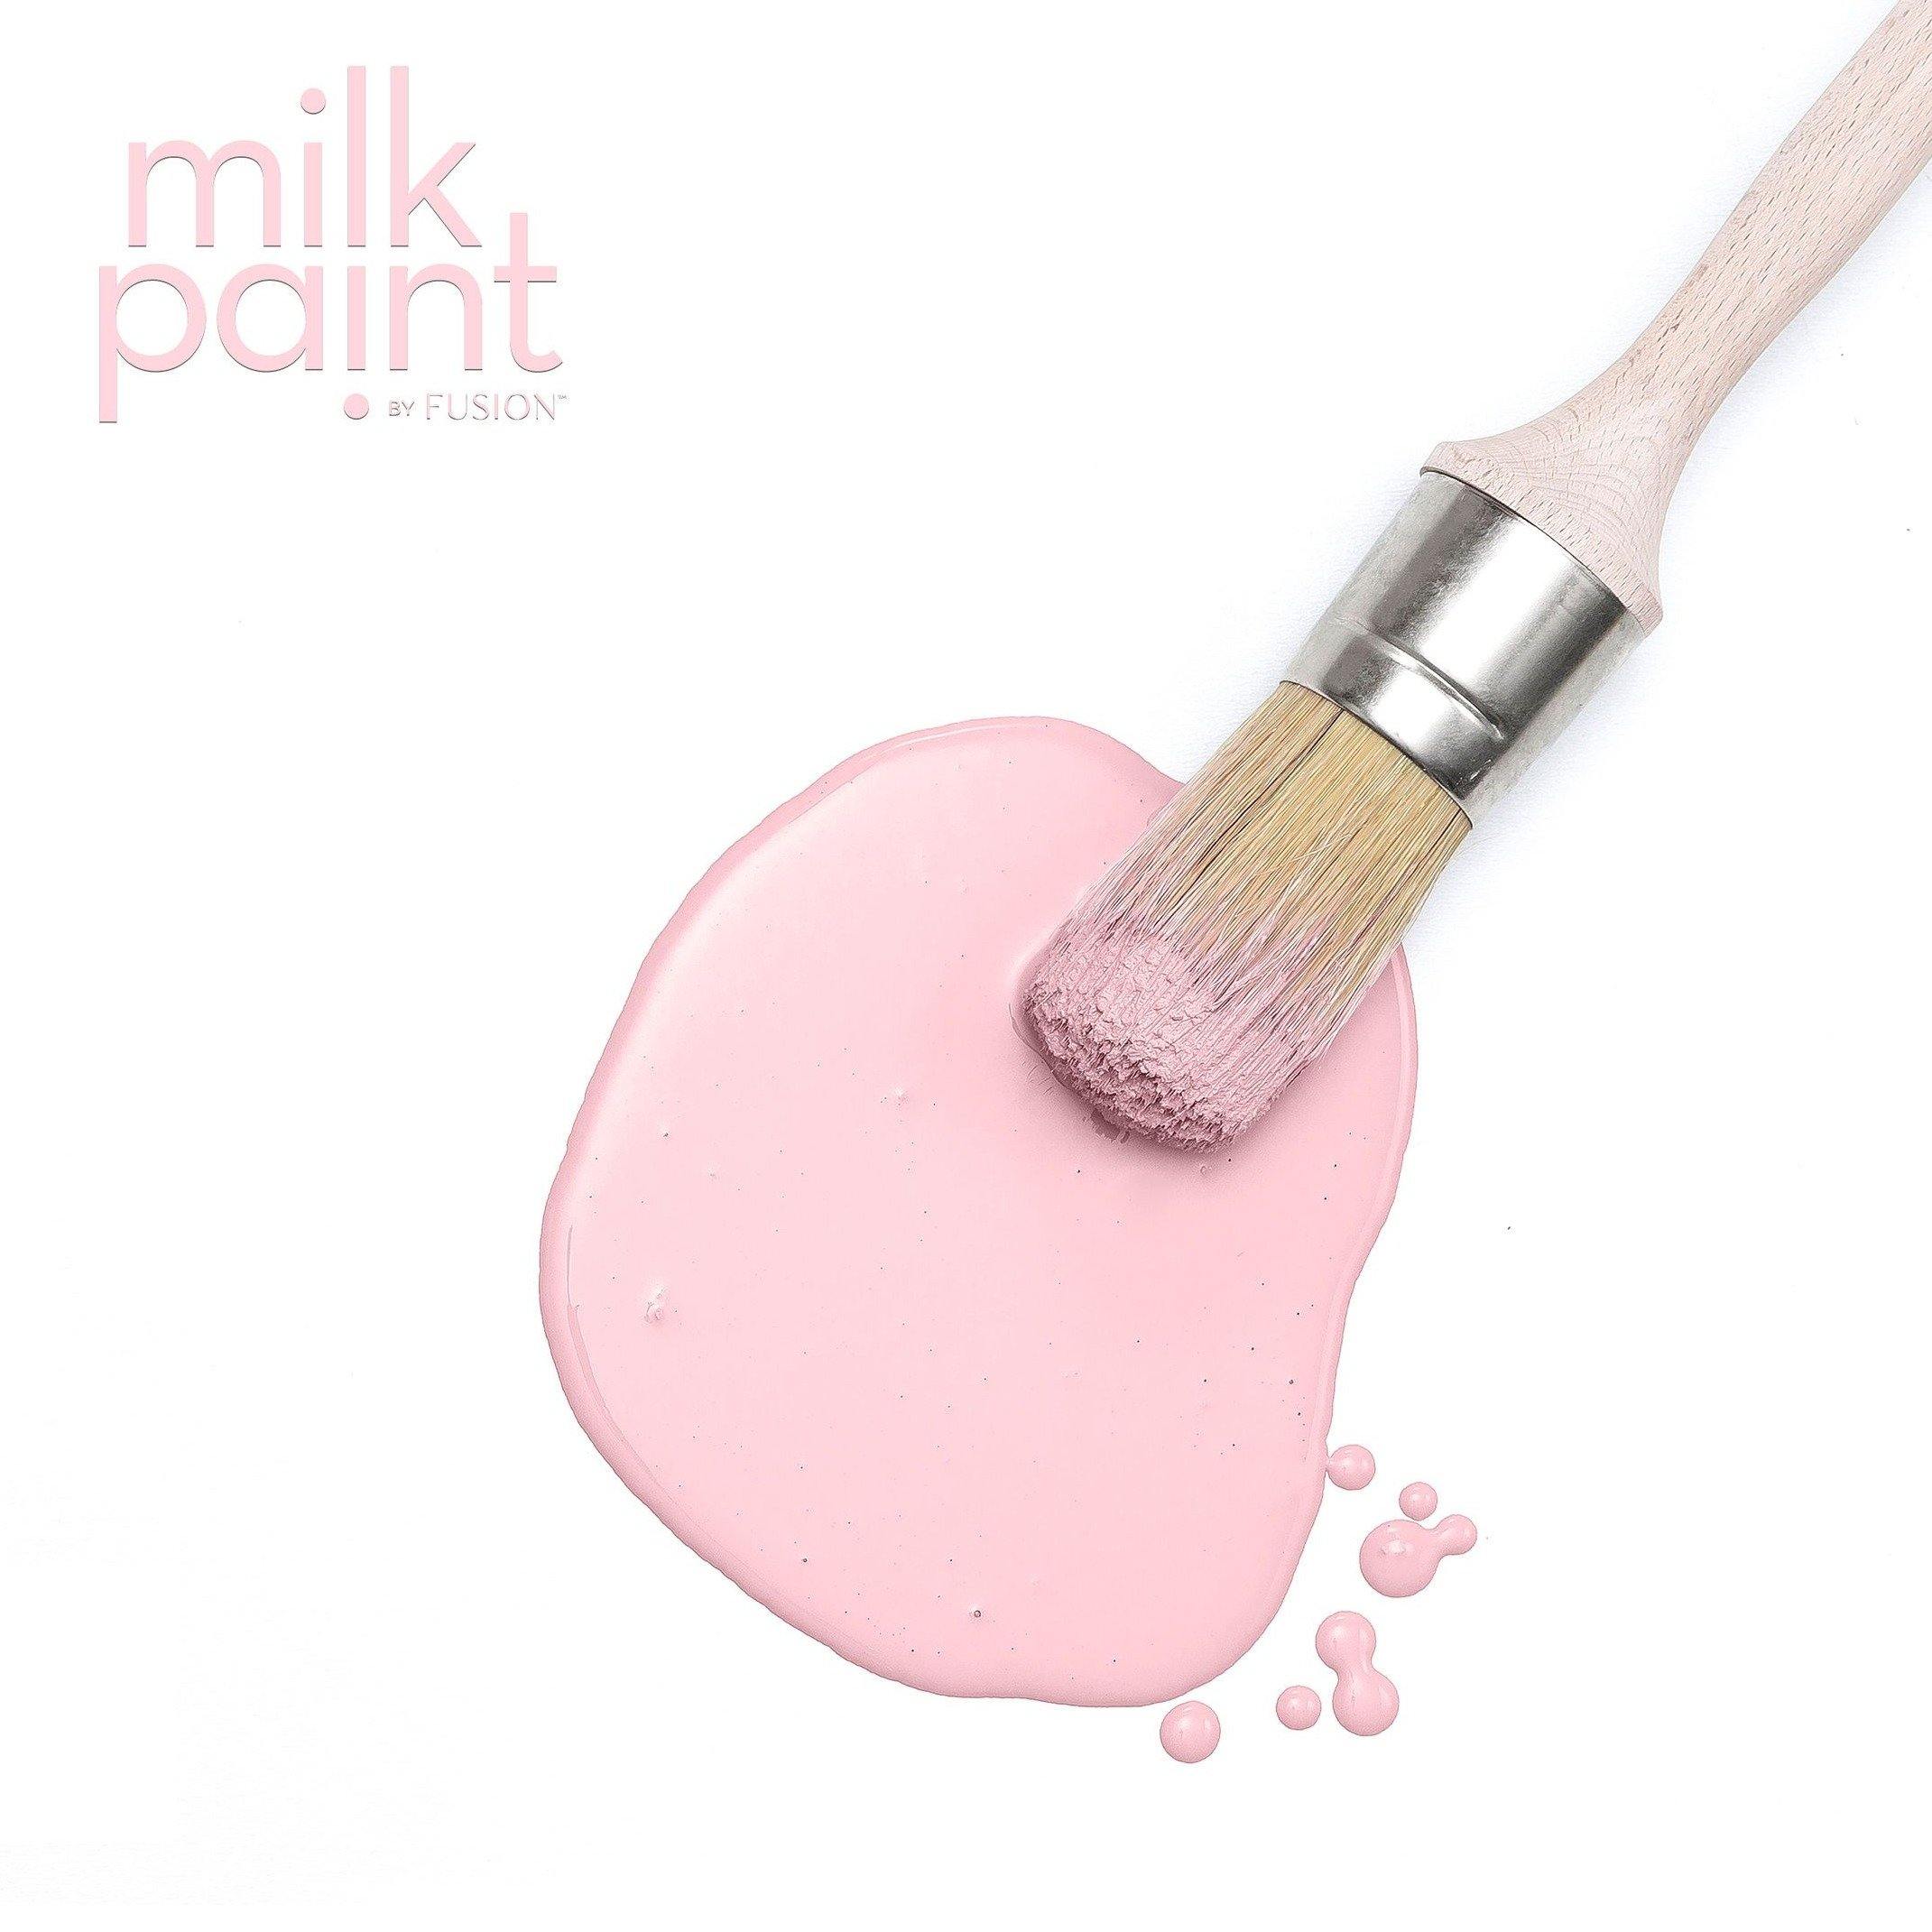 Milk Paint by Fusion - Millennial Pink - Smallhill Furniture Co.